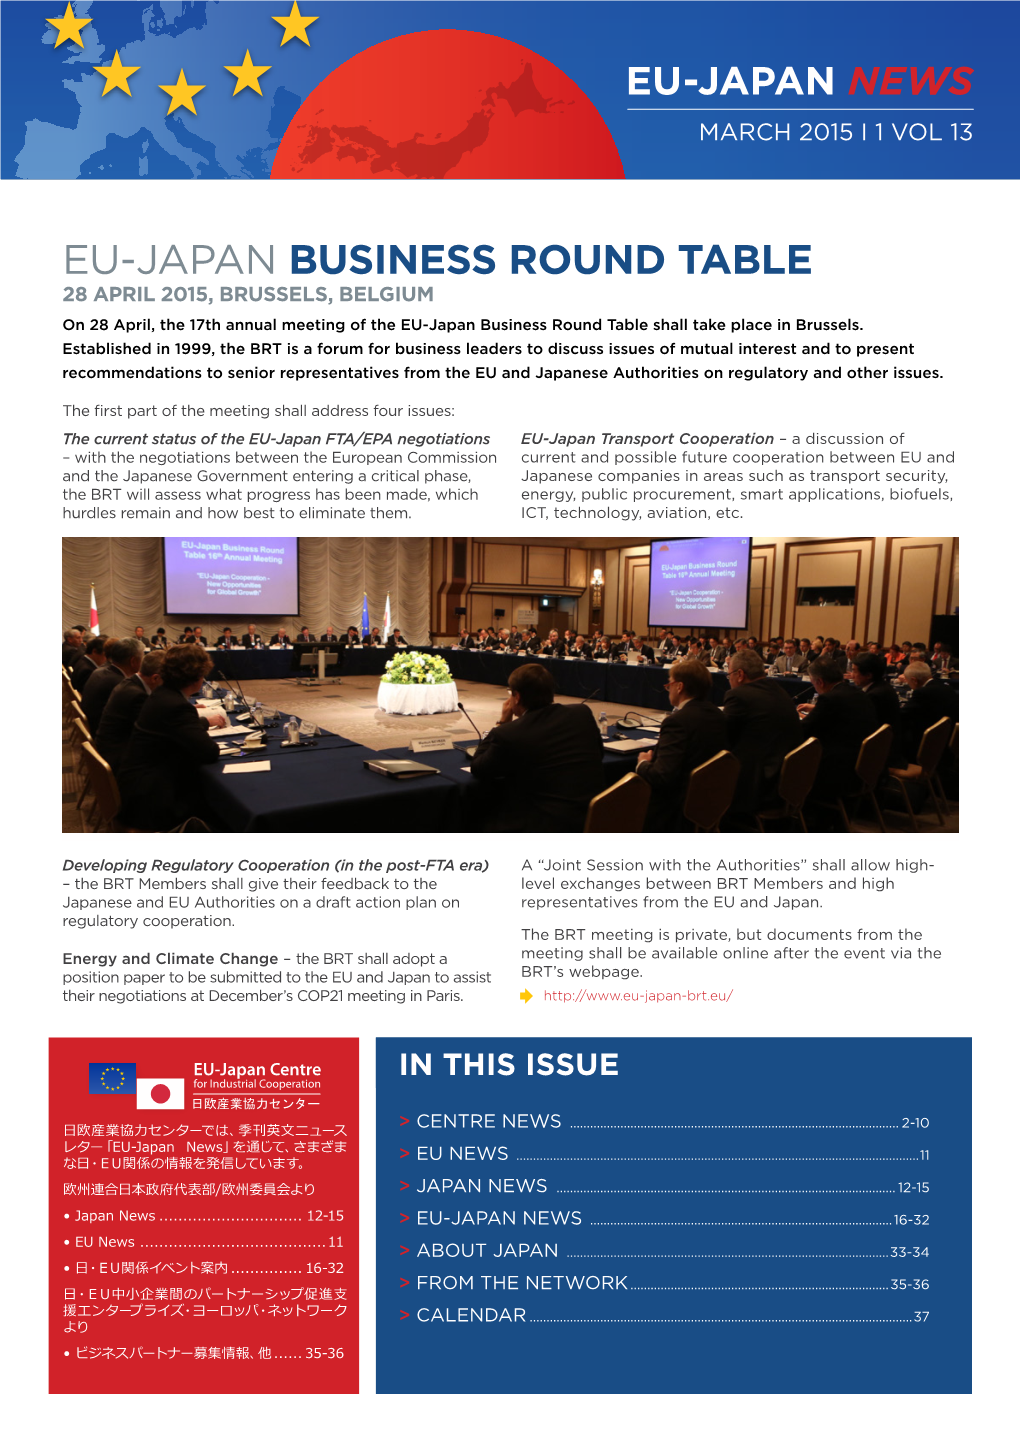 EU-JAPAN BUSINESS ROUND TABLE 28 APRIL 2015, BRUSSELS, BELGIUM on 28 April, the 17Th Annual Meeting of the EU-Japan Business Round Table Shall Take Place in Brussels